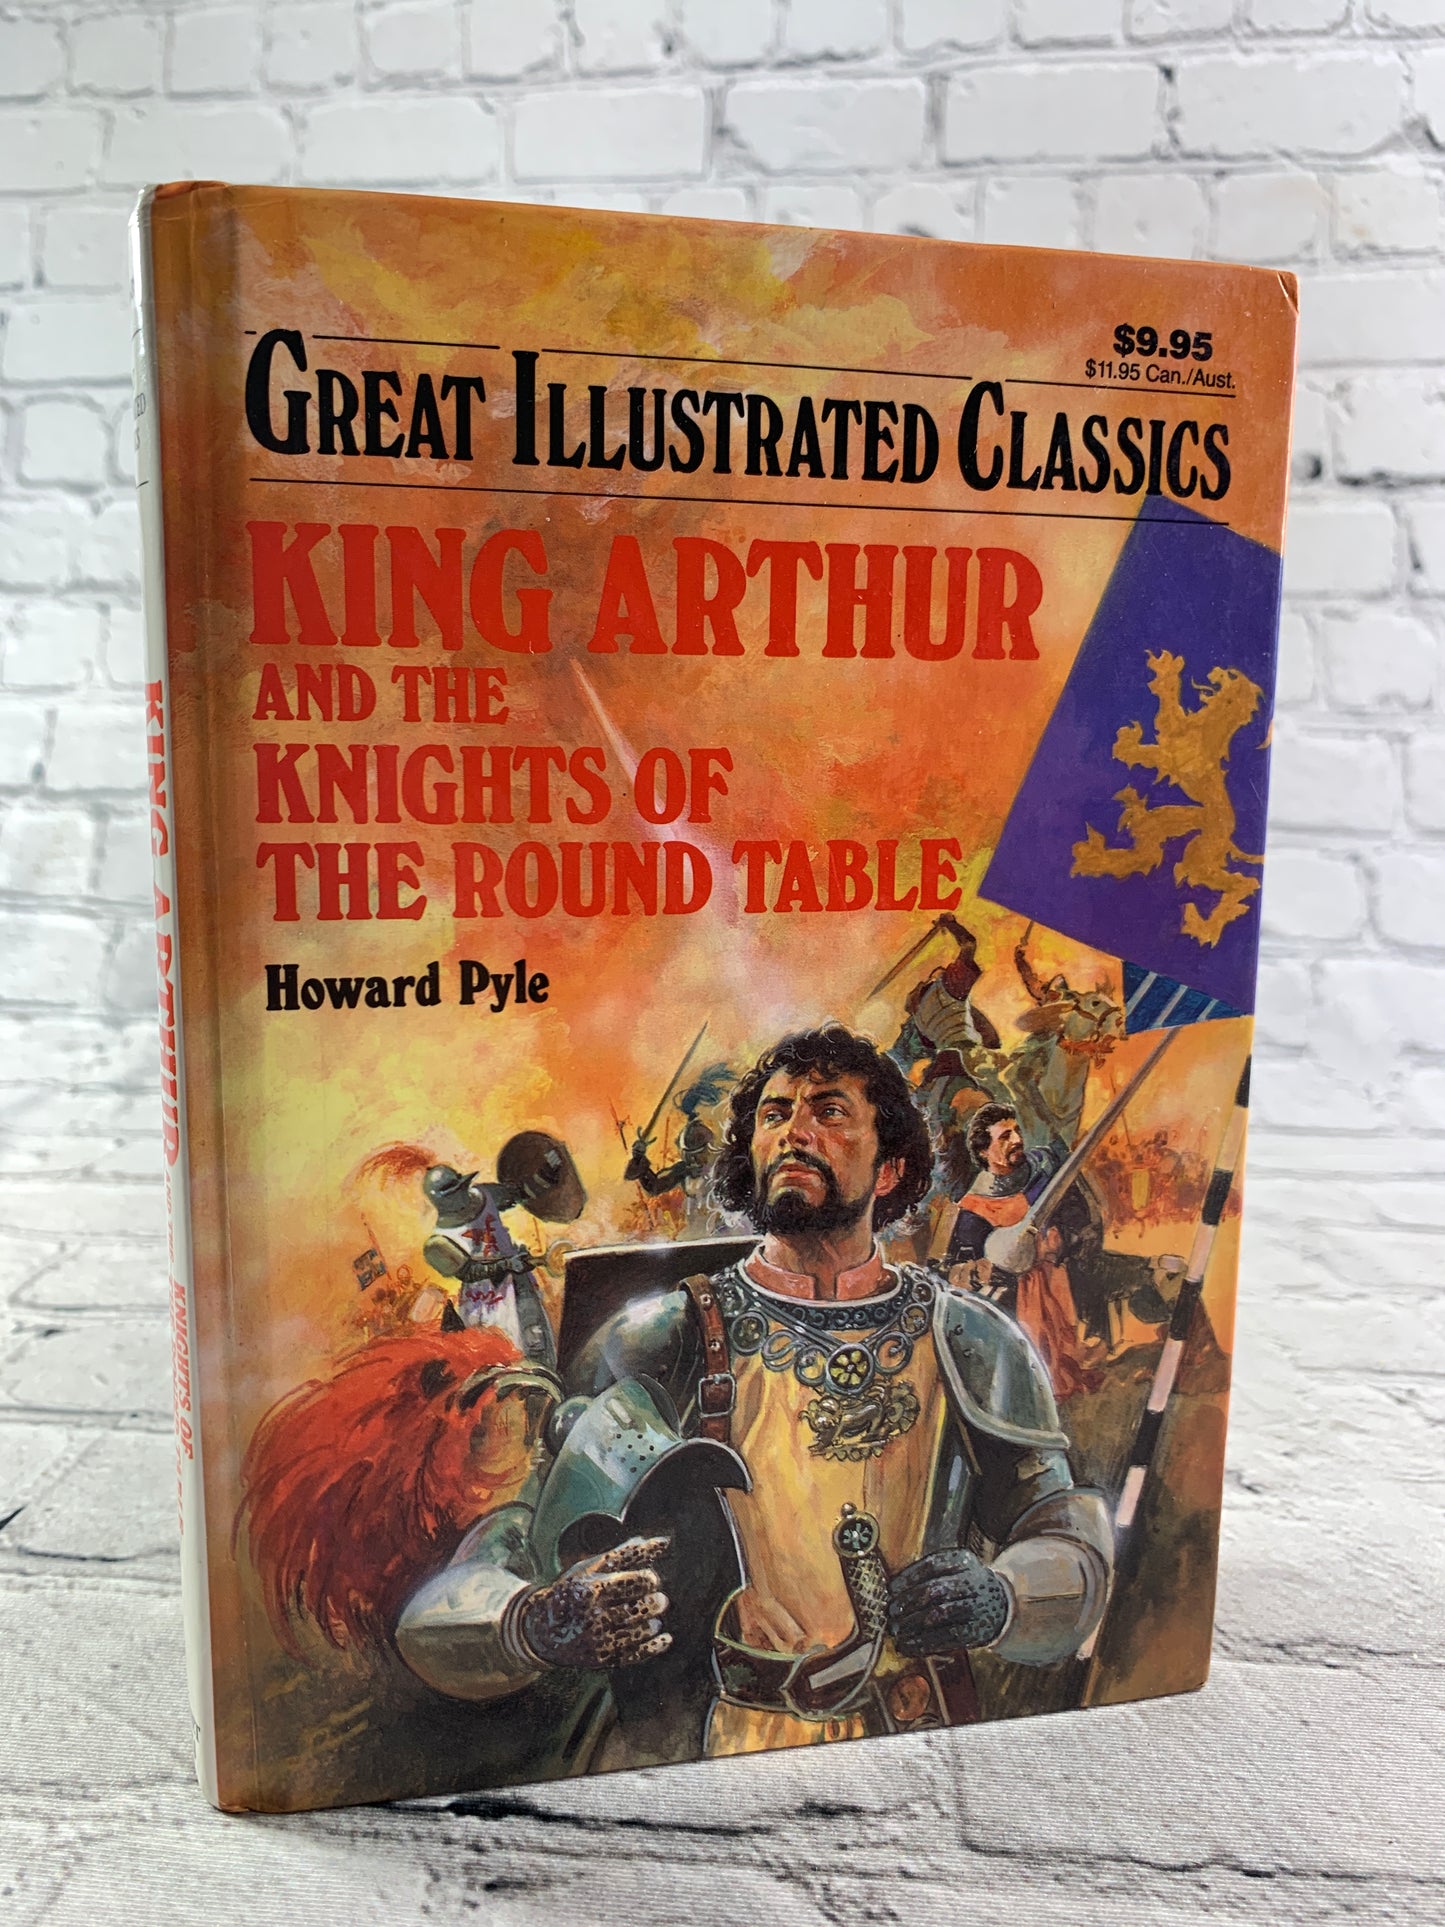 King Arthur and the Knights of the Round Table by Howard Pyle [Great Illustrated Classics · 1997]